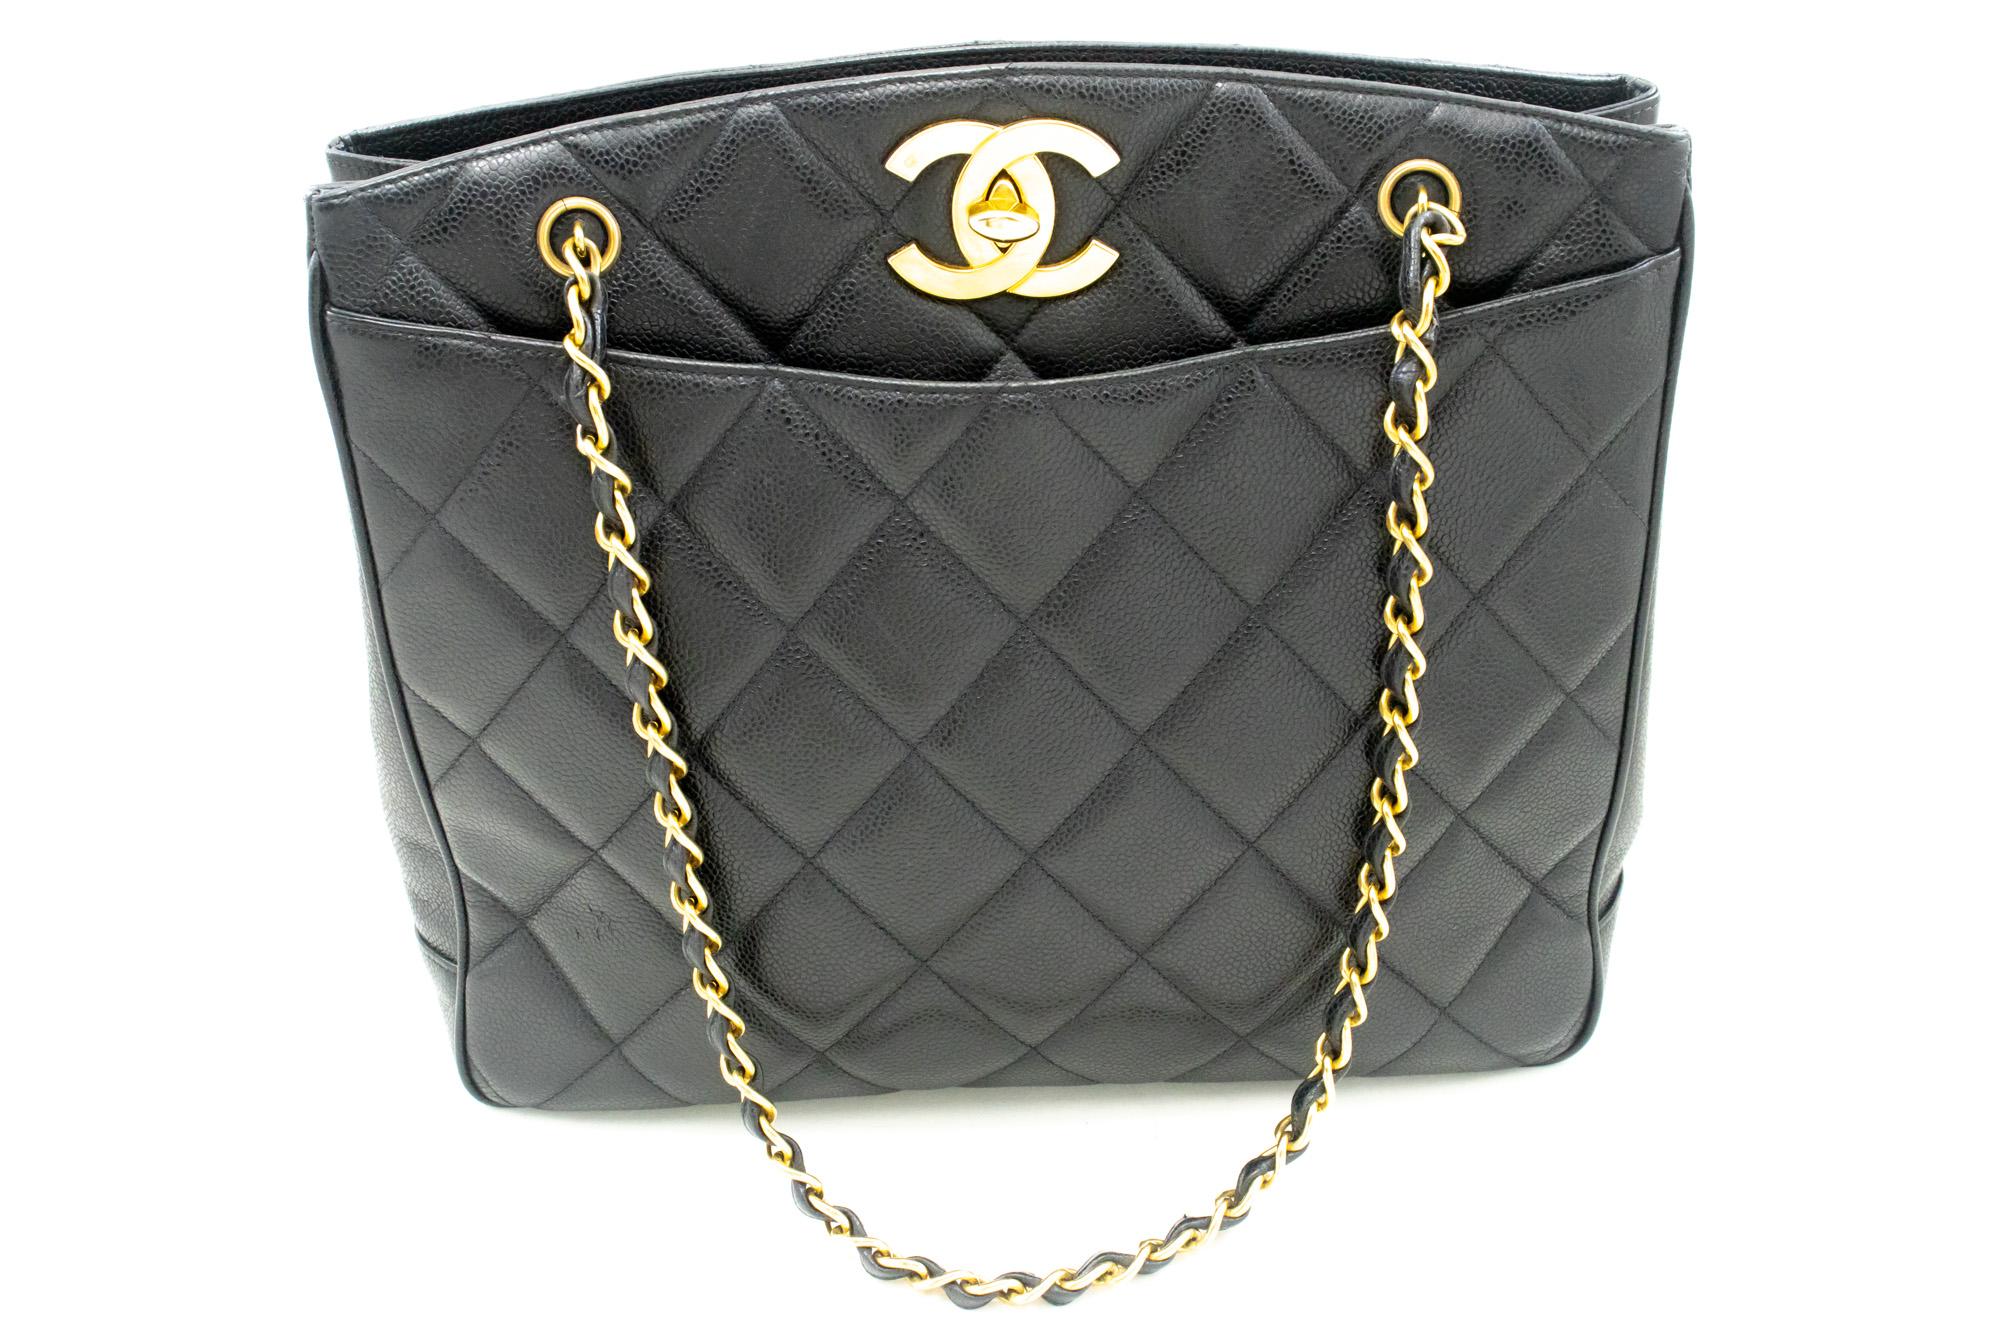 An authentic CHANEL Caviar Large Chain Shoulder Bag Black Quilted Leather. The color is Black. The outside material is Leather. The pattern is Solid. This item is Vintage / Classic. The year of manufacture would be 1994-1996.
Conditions &